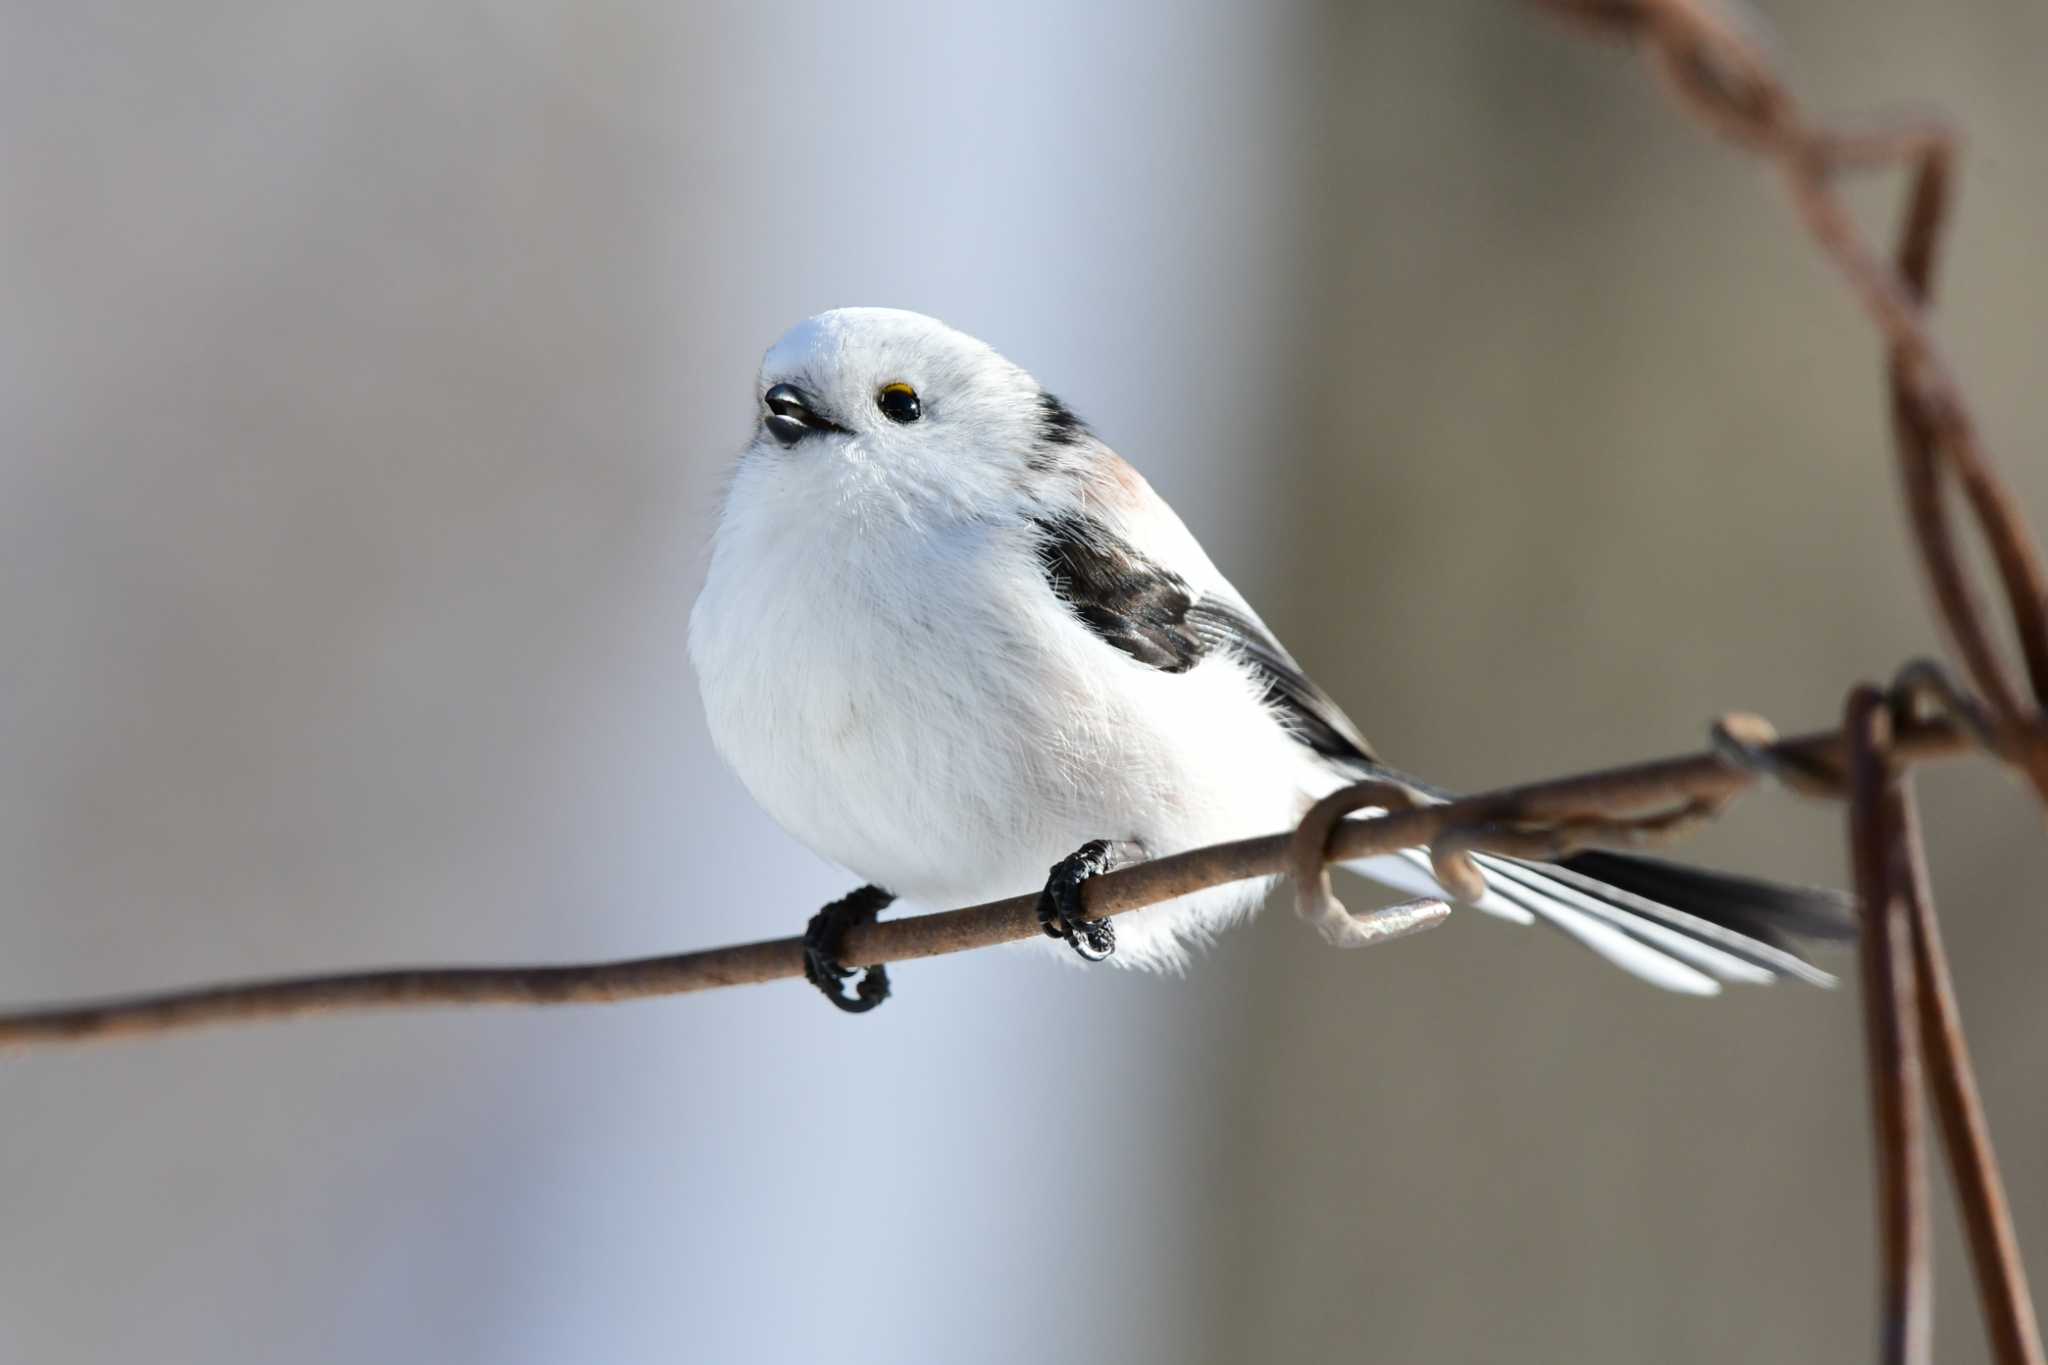 Photo of Long-tailed tit(japonicus) at 千歳市 by ありちゃん